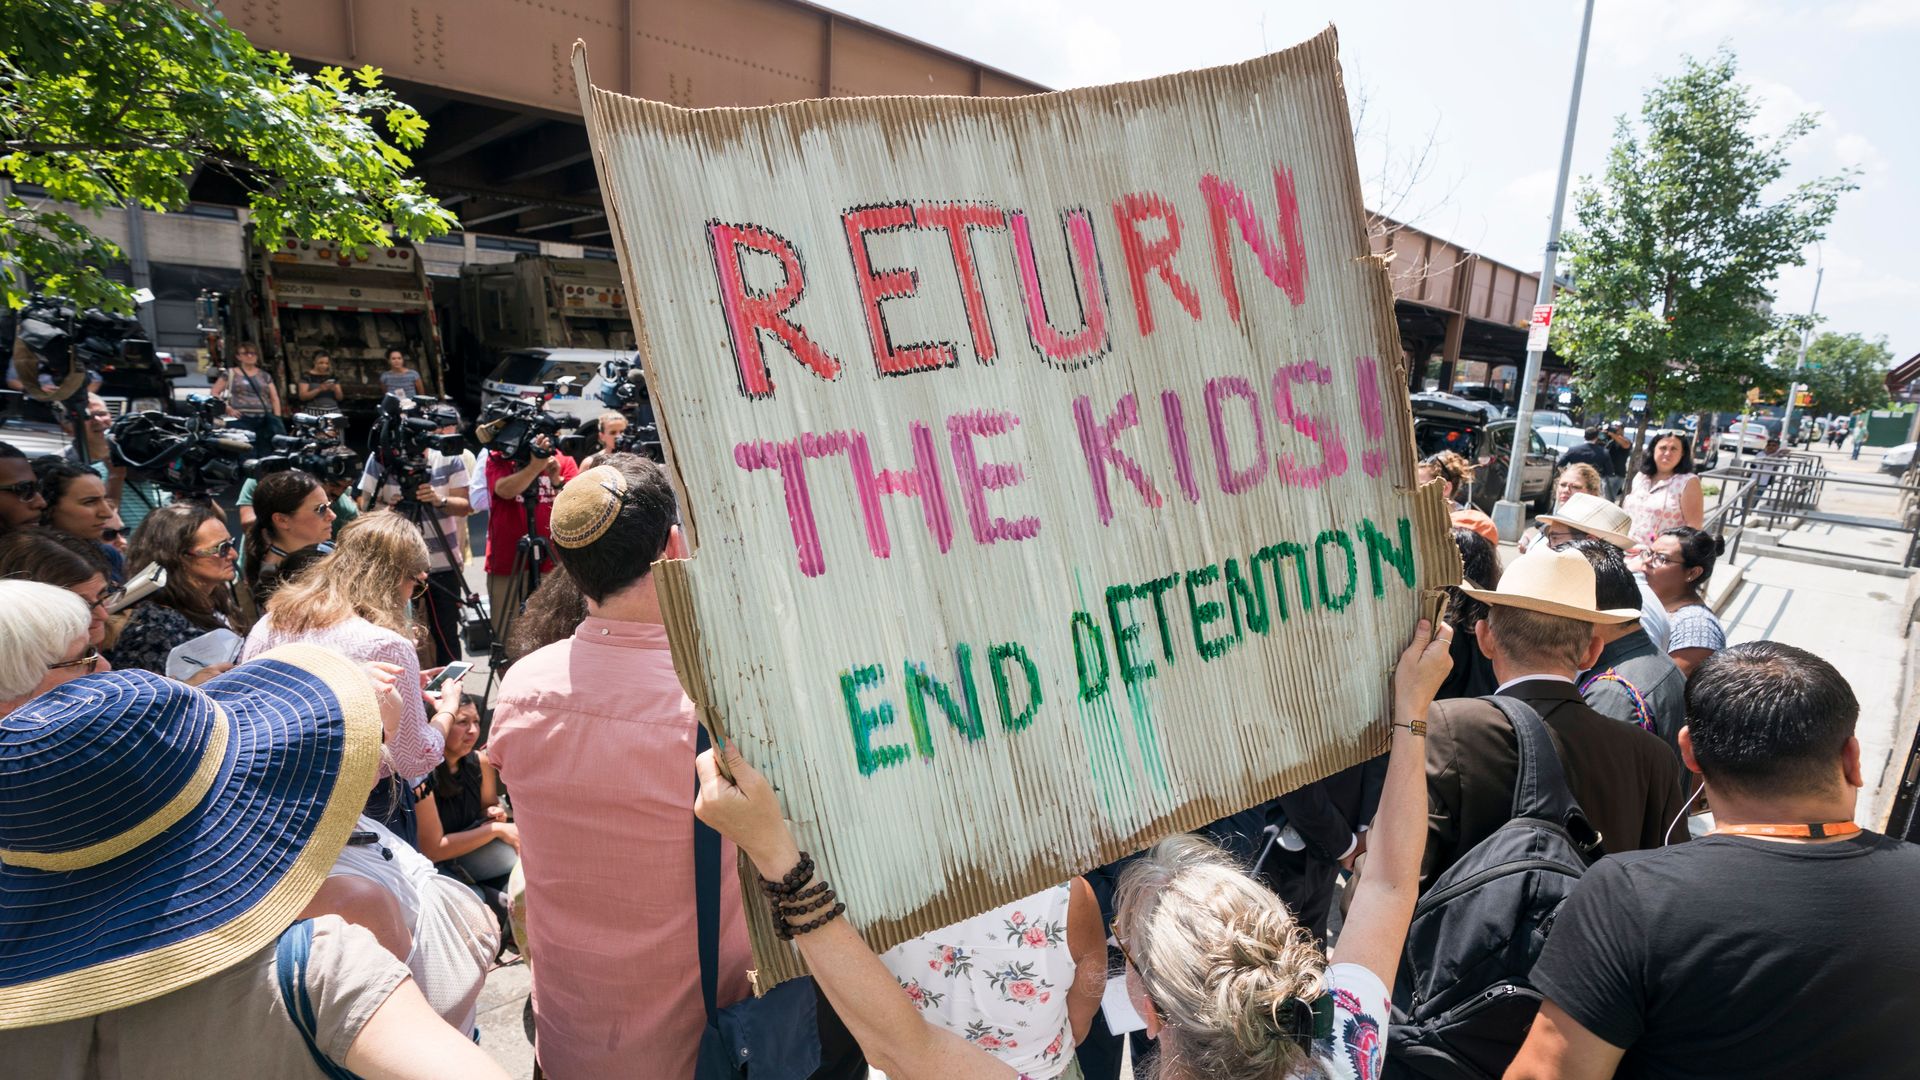 A protestor holding a sign that says "return the kids, end detention"